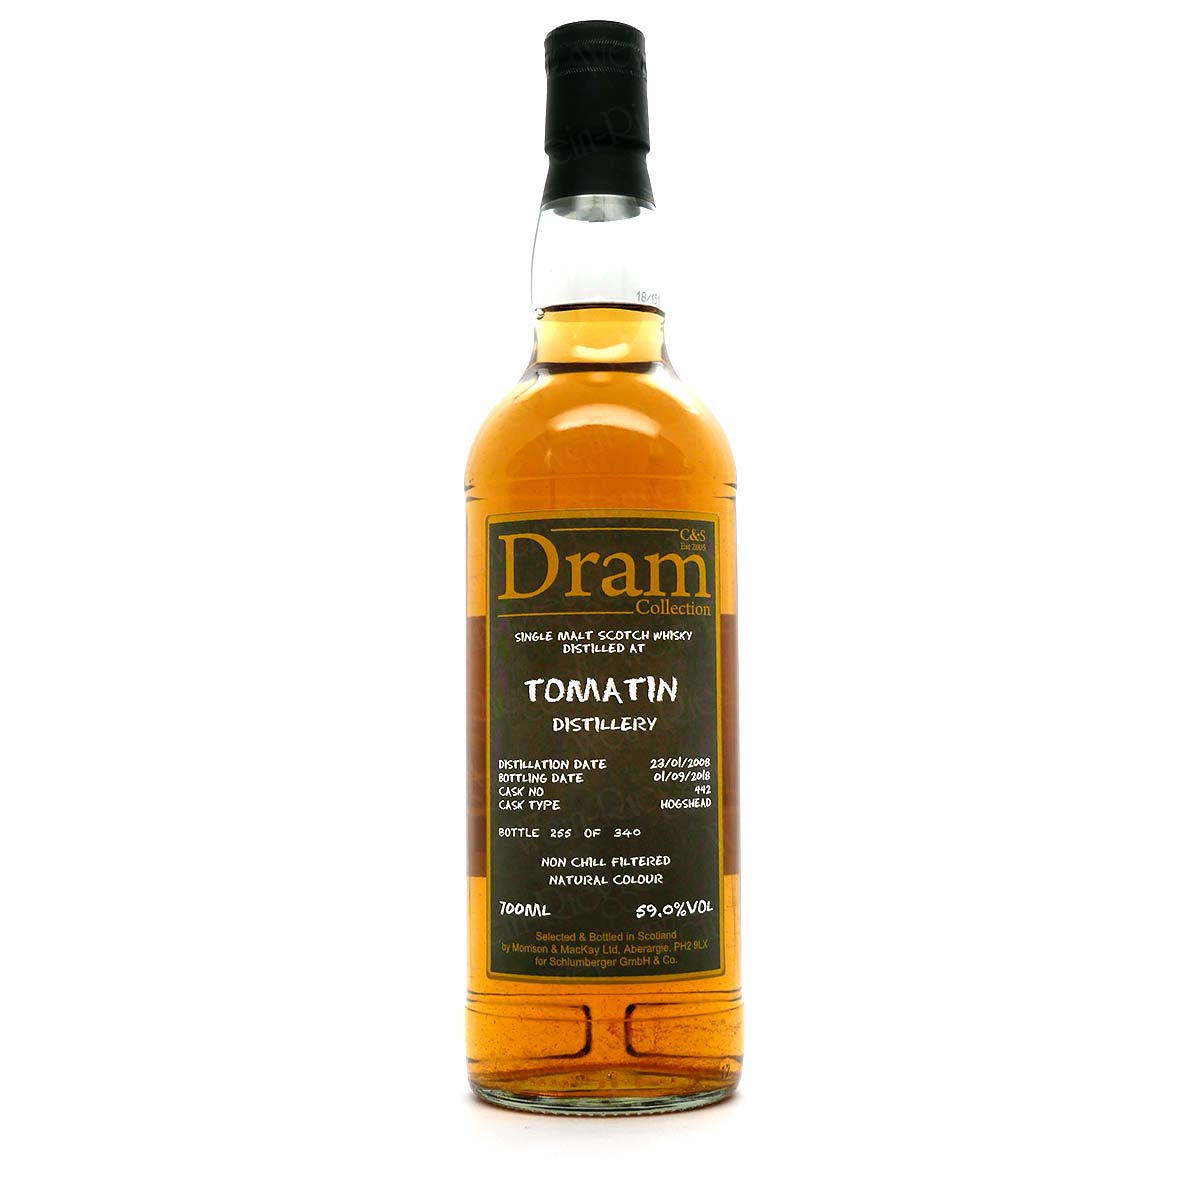 Tomatin 2008-2018 59,0 % vol | C&S Dram Collection